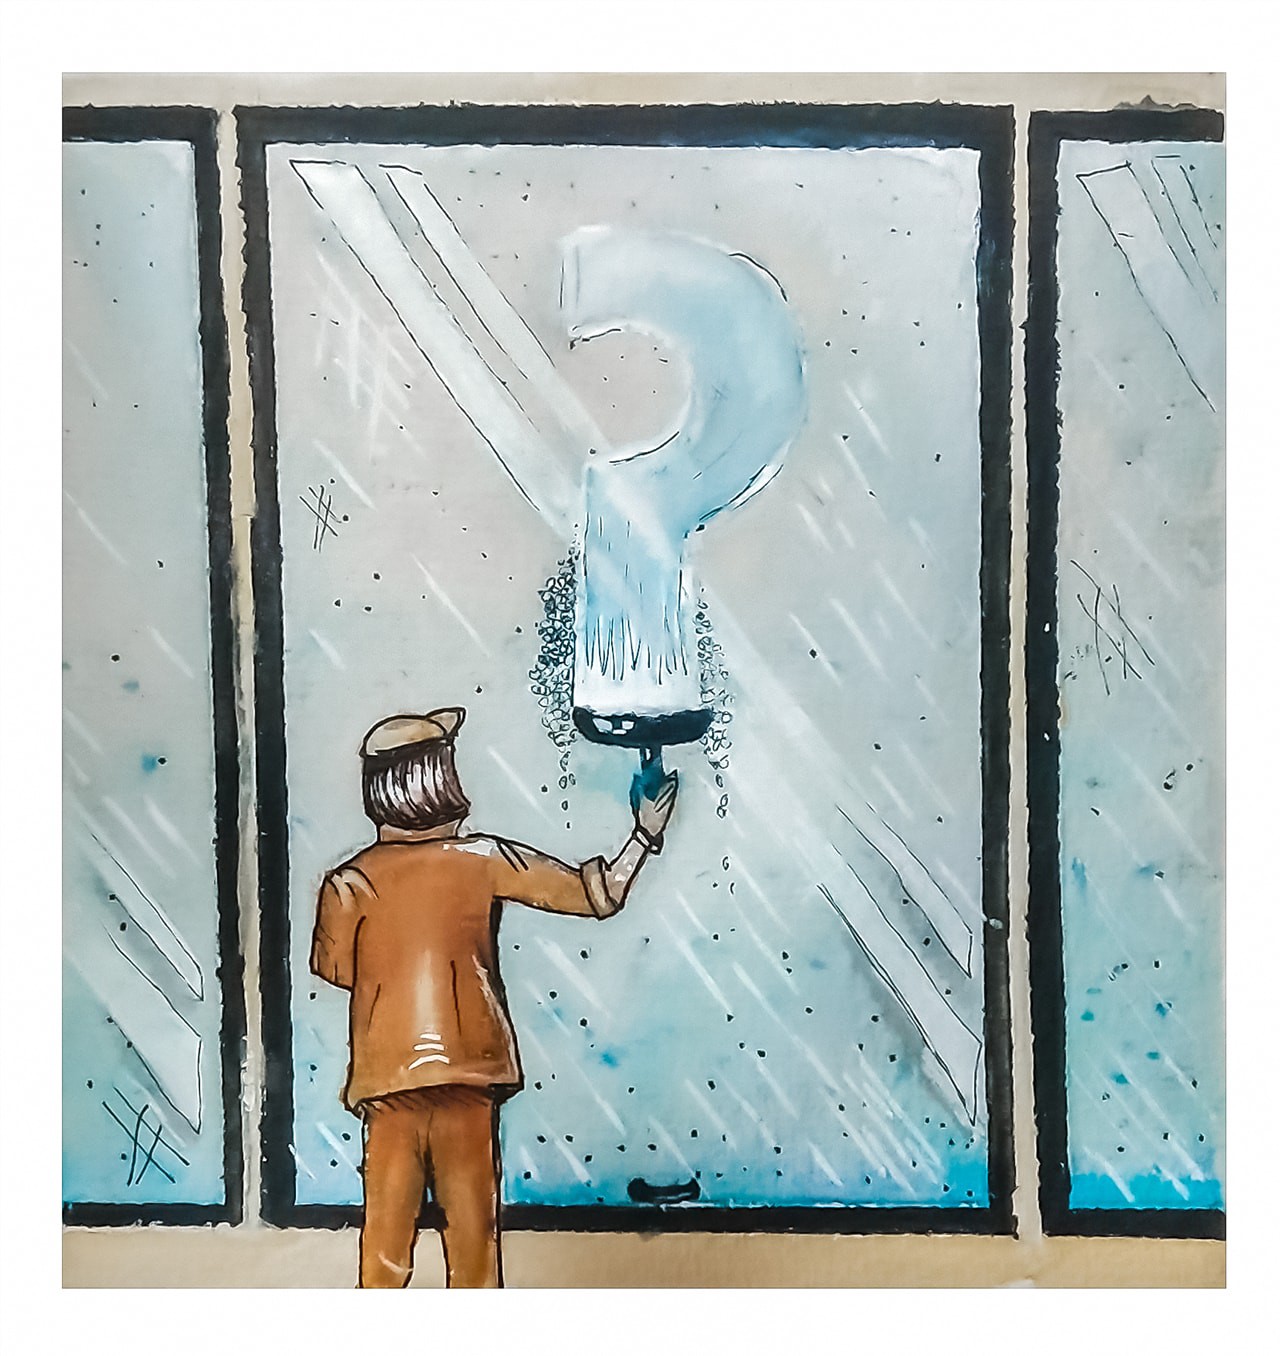 Painting of a person cleaning glass window, in a pattern forming a question mark